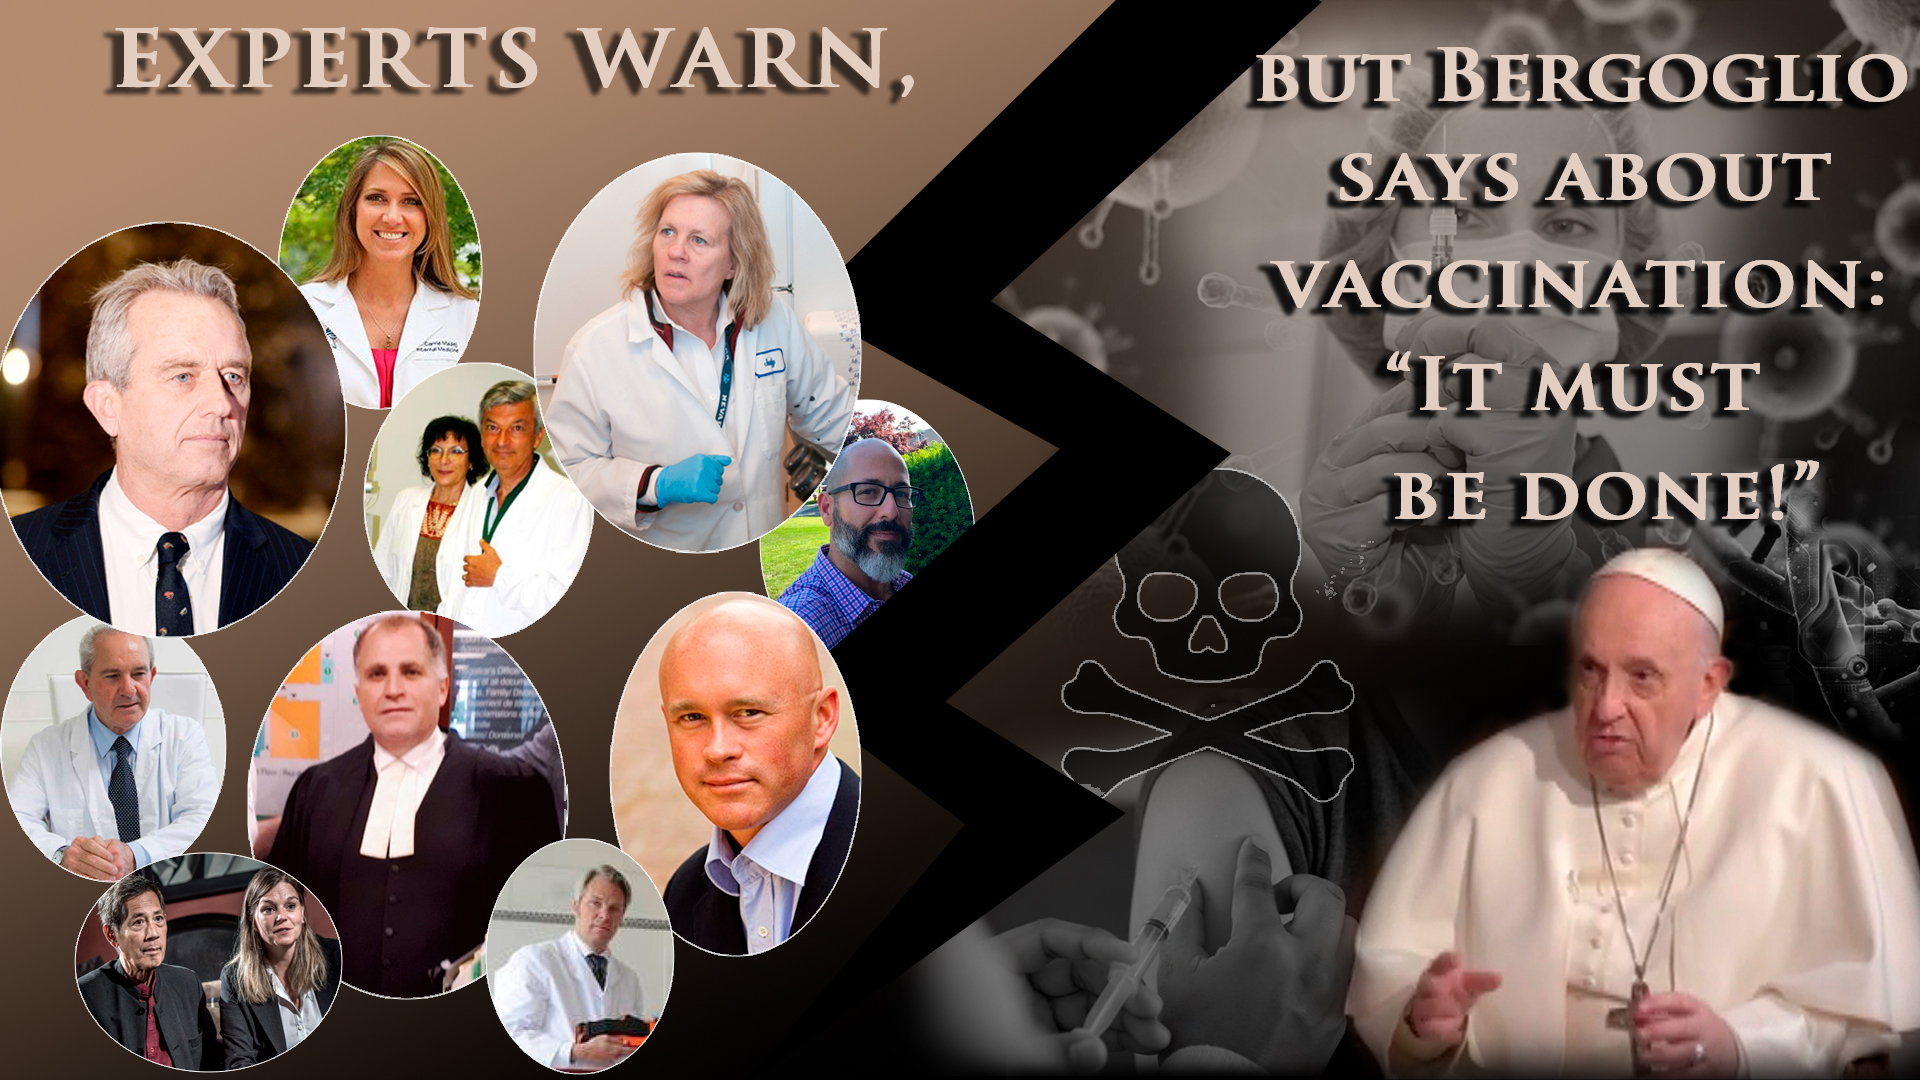 Experts warn, but Bergoglio says about vaccination: “It must be done!” - Truth Be Told